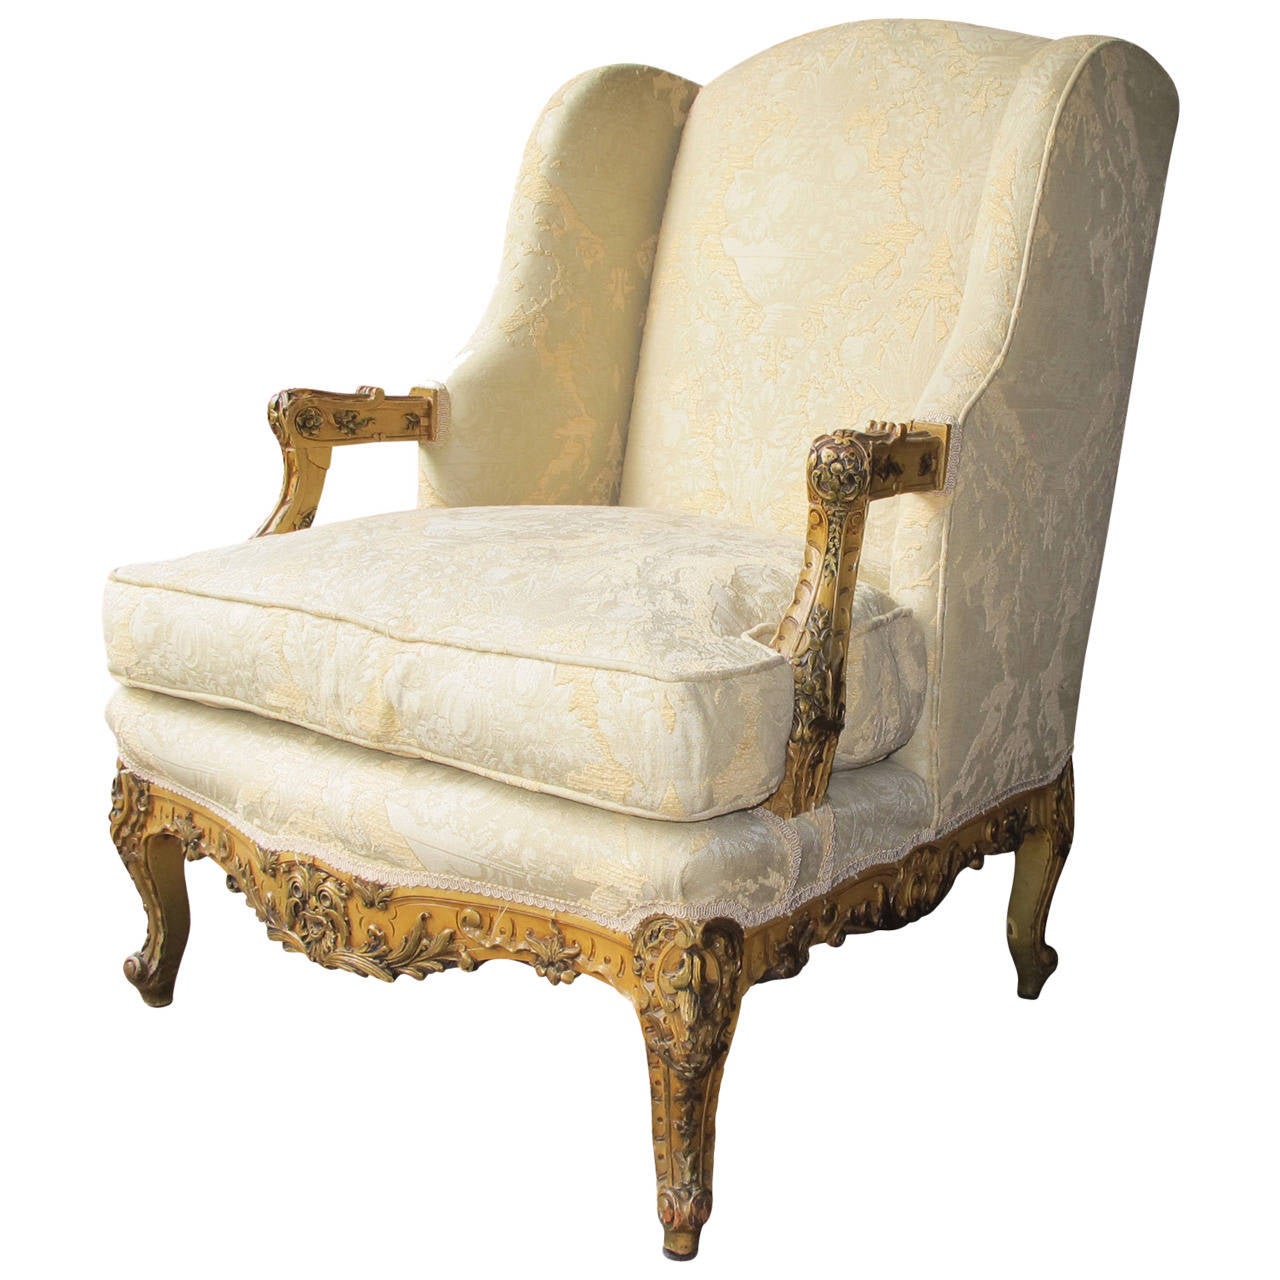 Beautiful Louis XIV Style Bergere Chair at 1stdibs